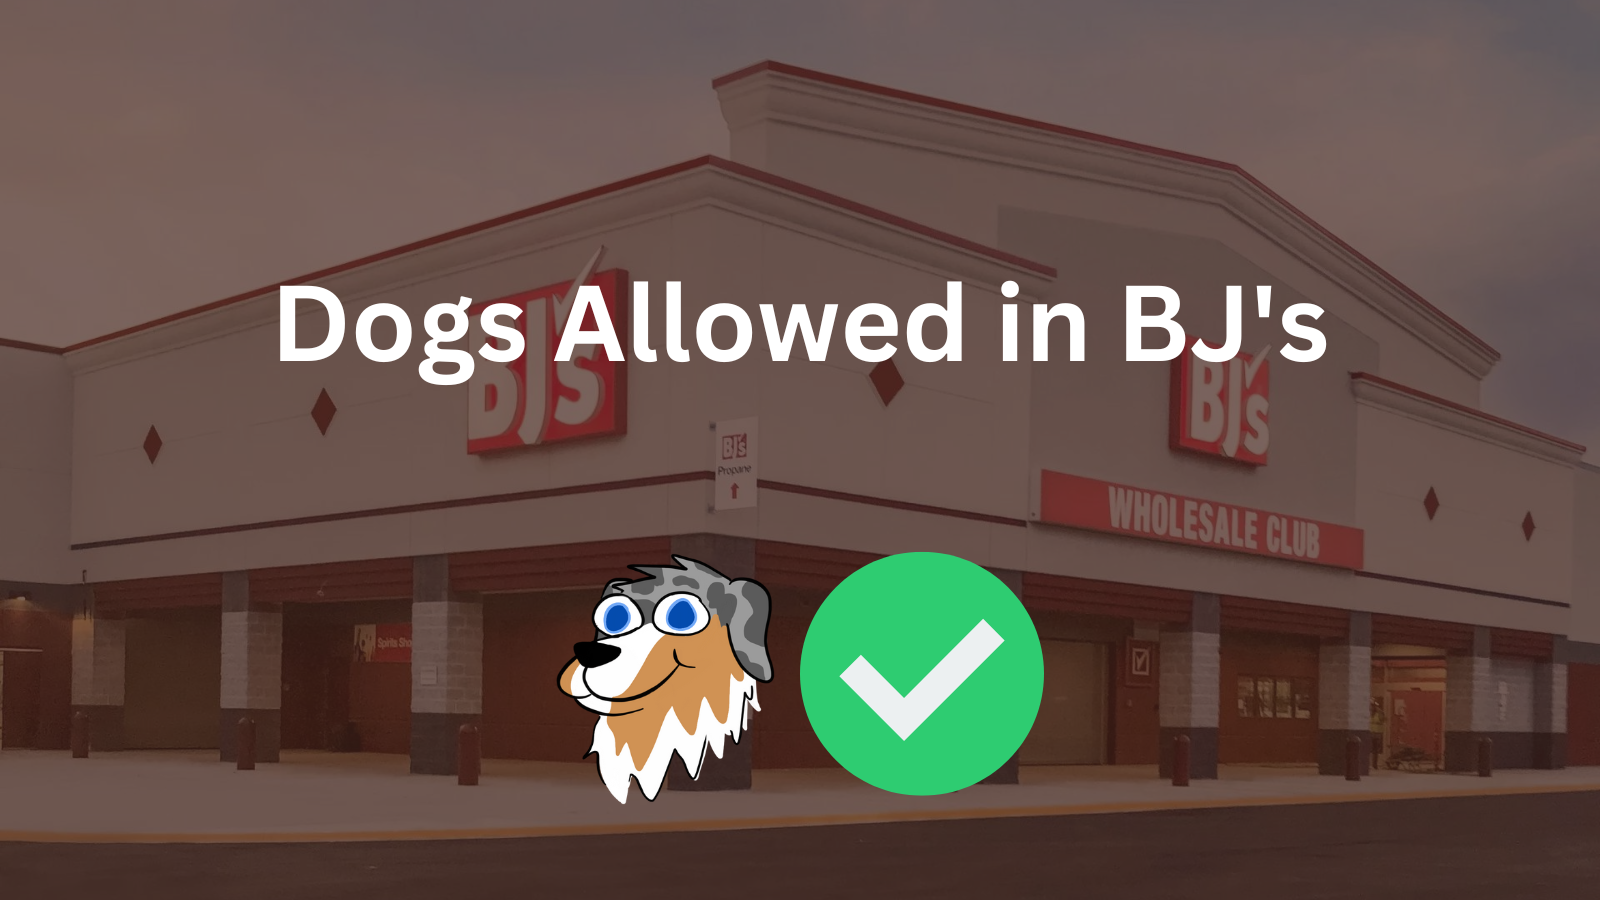 Image Text: "Dogs Allowed in BJ's"